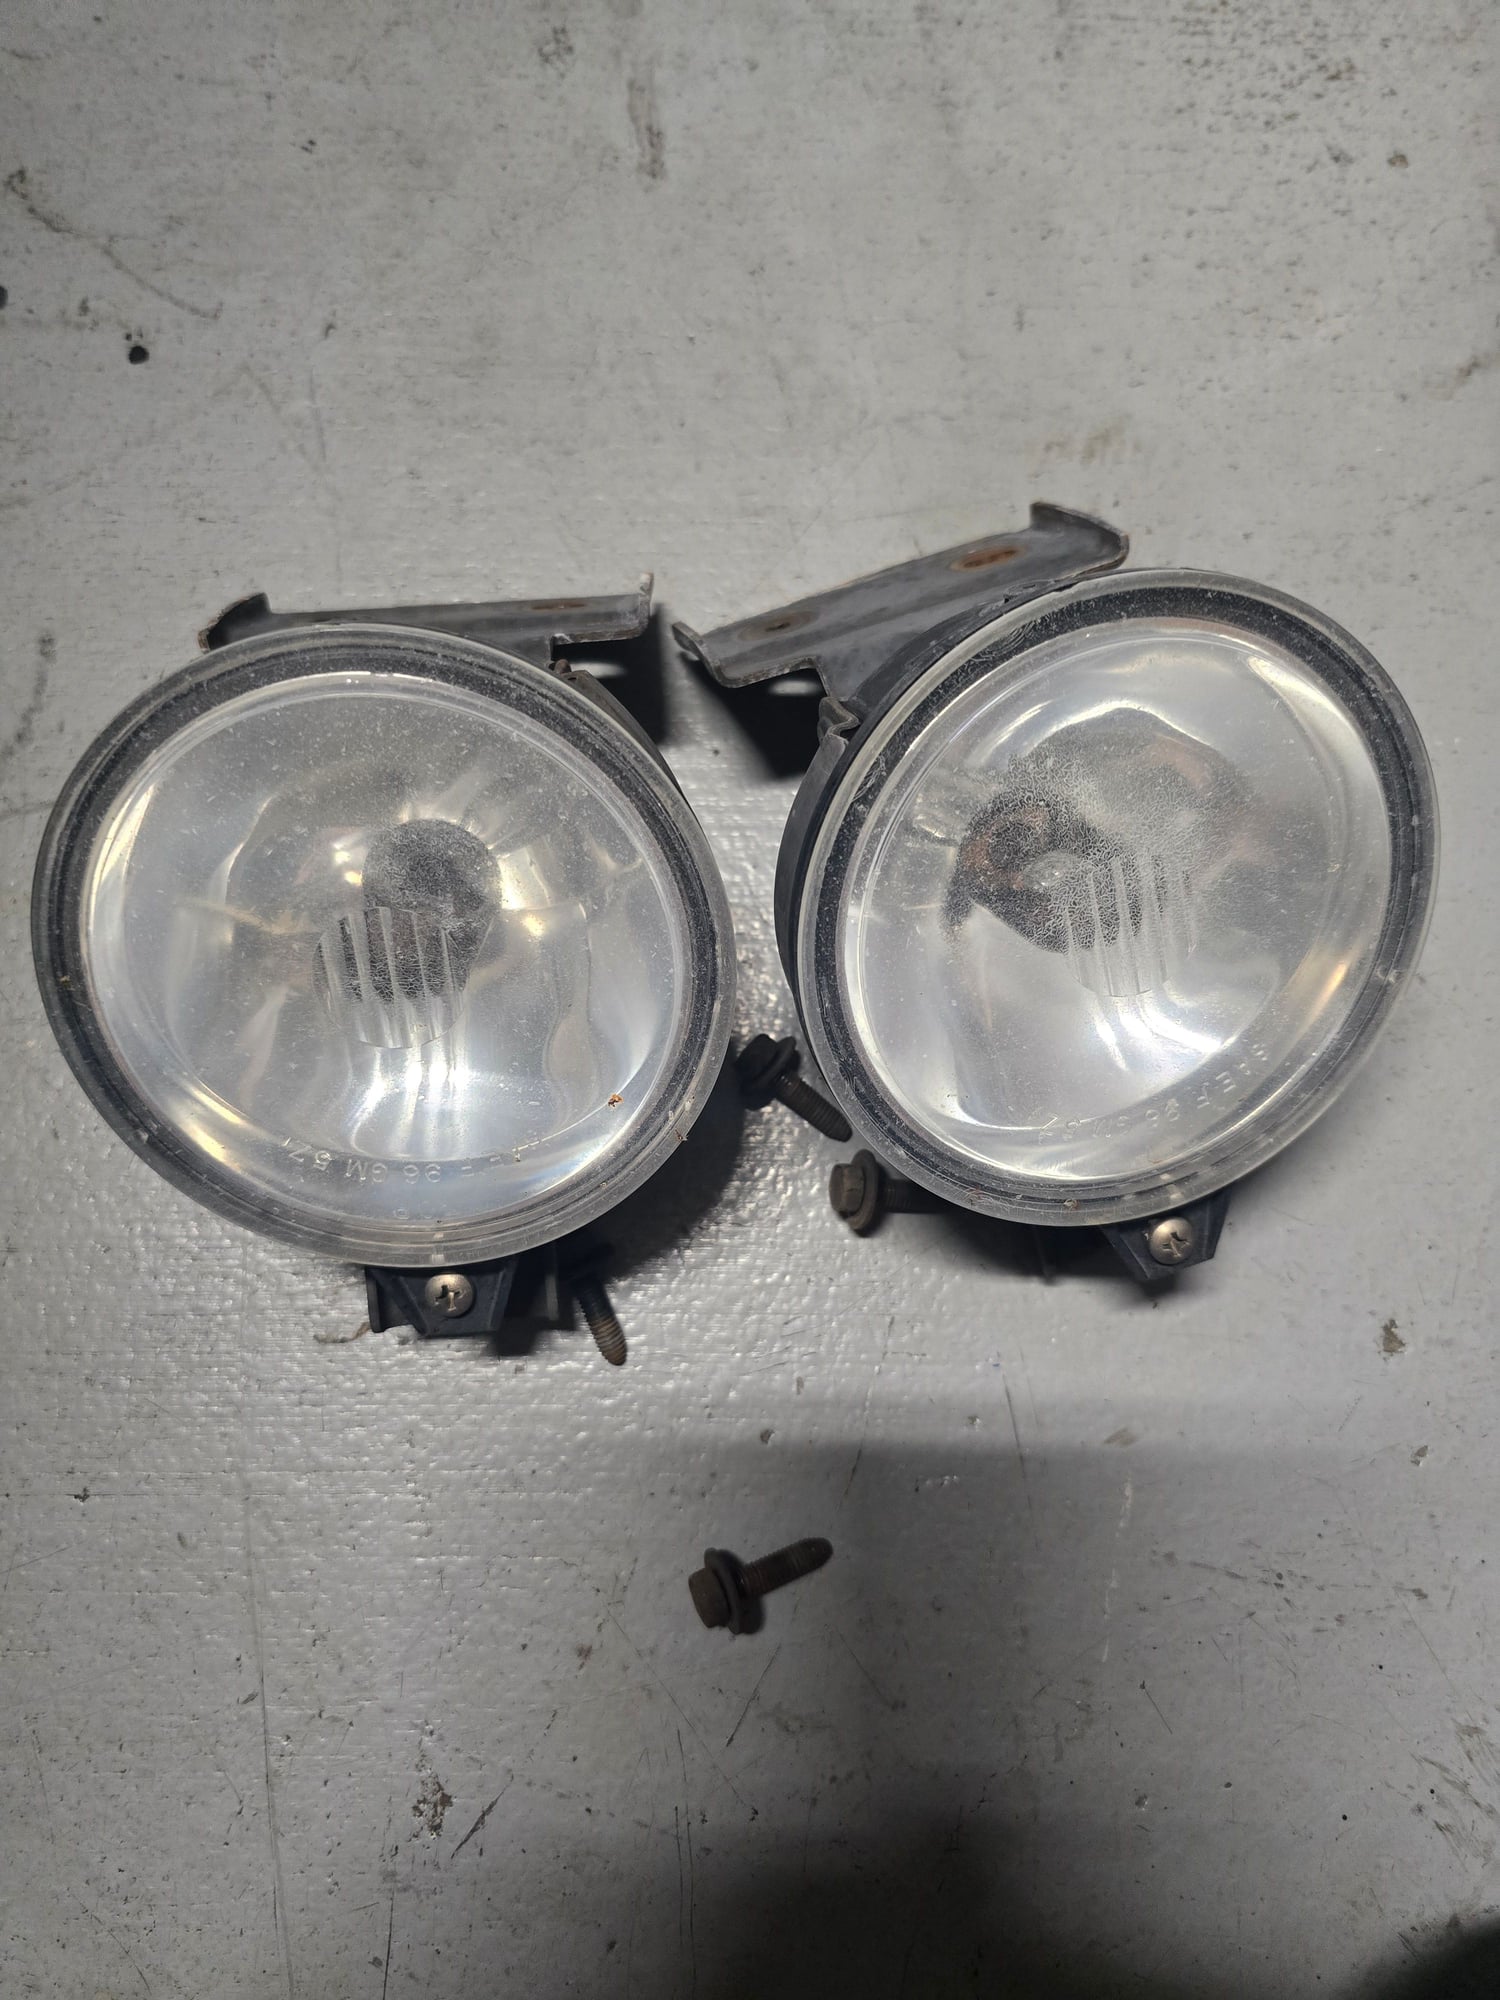 Miscellaneous - Transam fog lights - Used - 0  All Models - Queen Creek, AZ 85142, United States